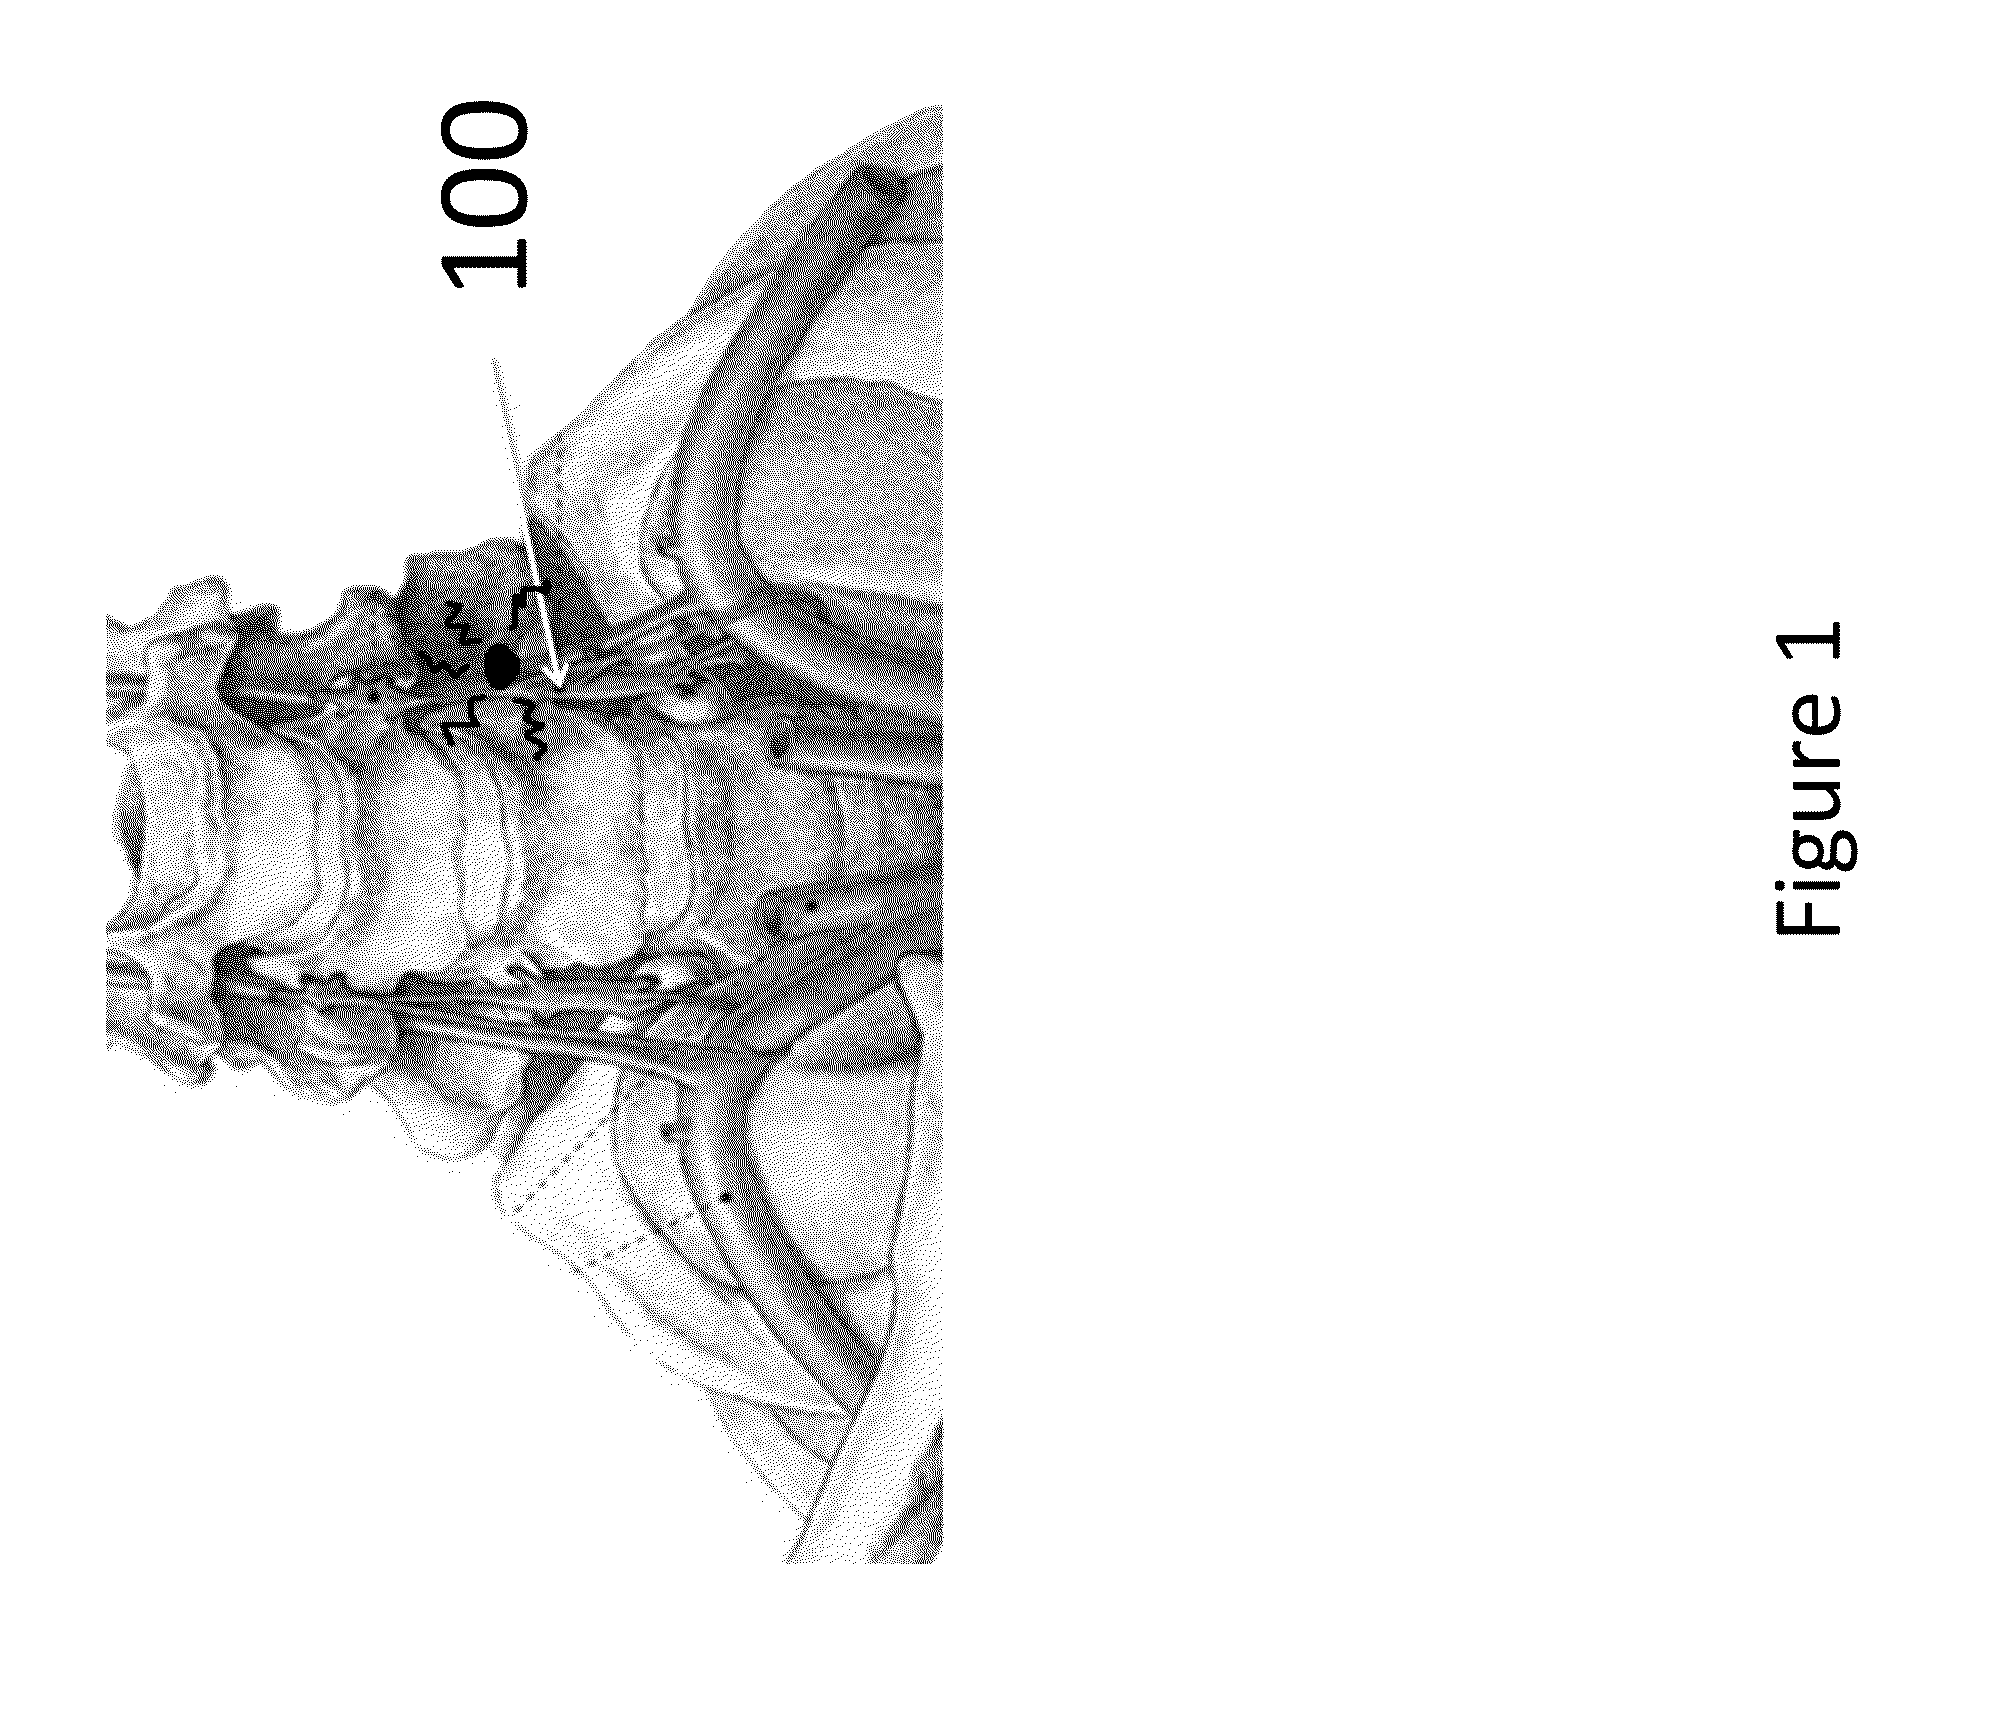 Device and method for interfering with sympathetic chain signaling for attenuating hot flashes, post-traumatic stress disorder, pain and dysautonomia